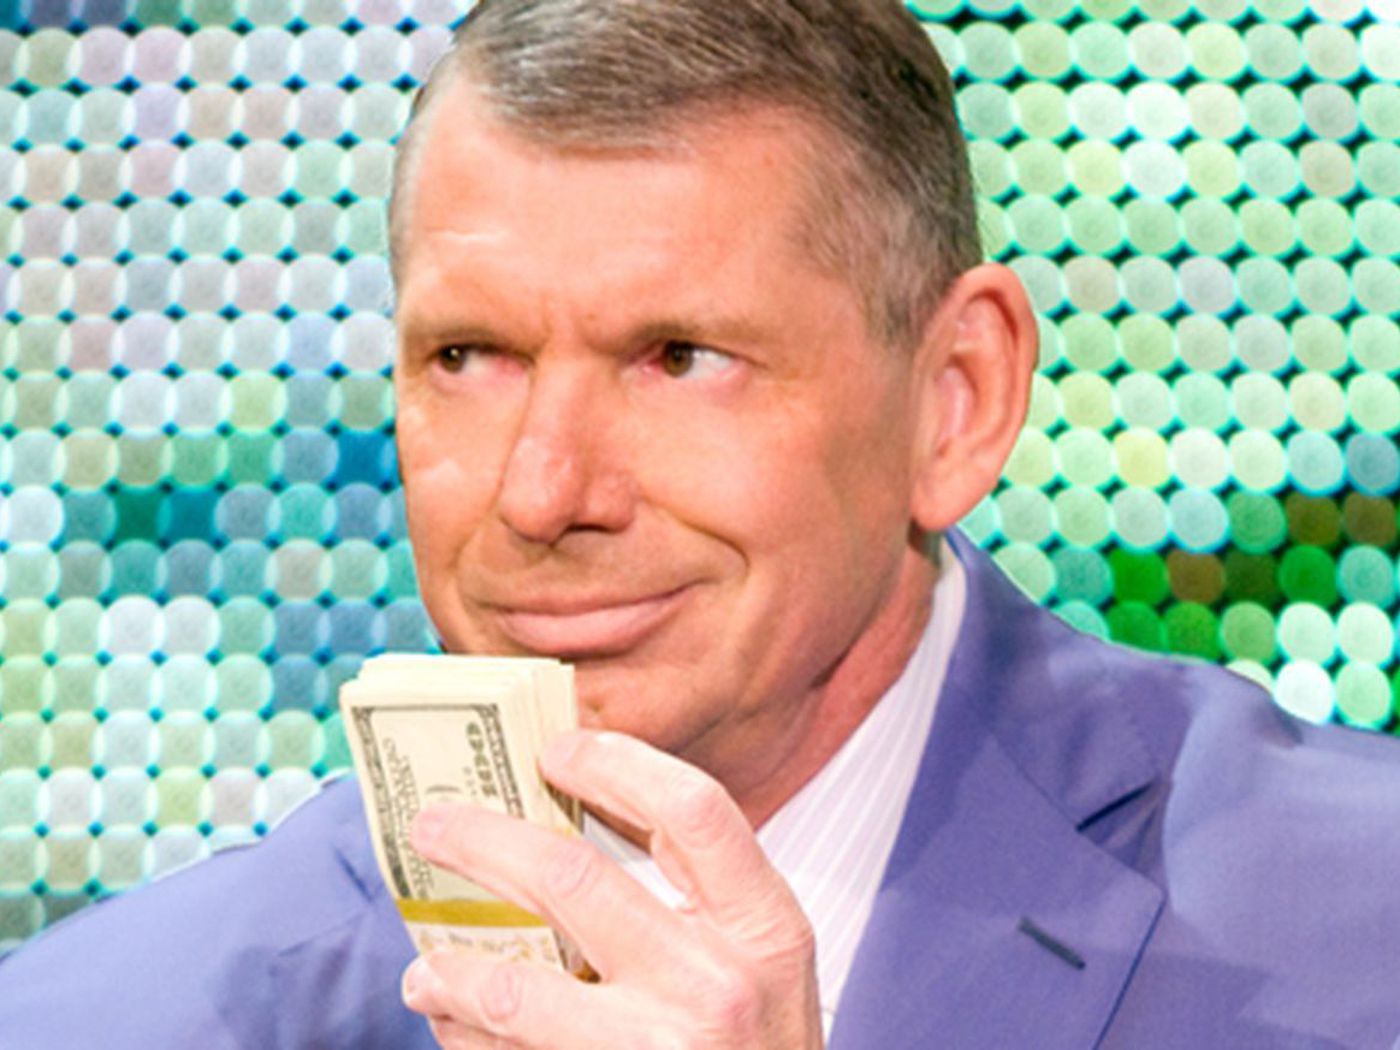 Vince McMahon has reportedly gotten $177 million richer during pandemic - Cageside Seats